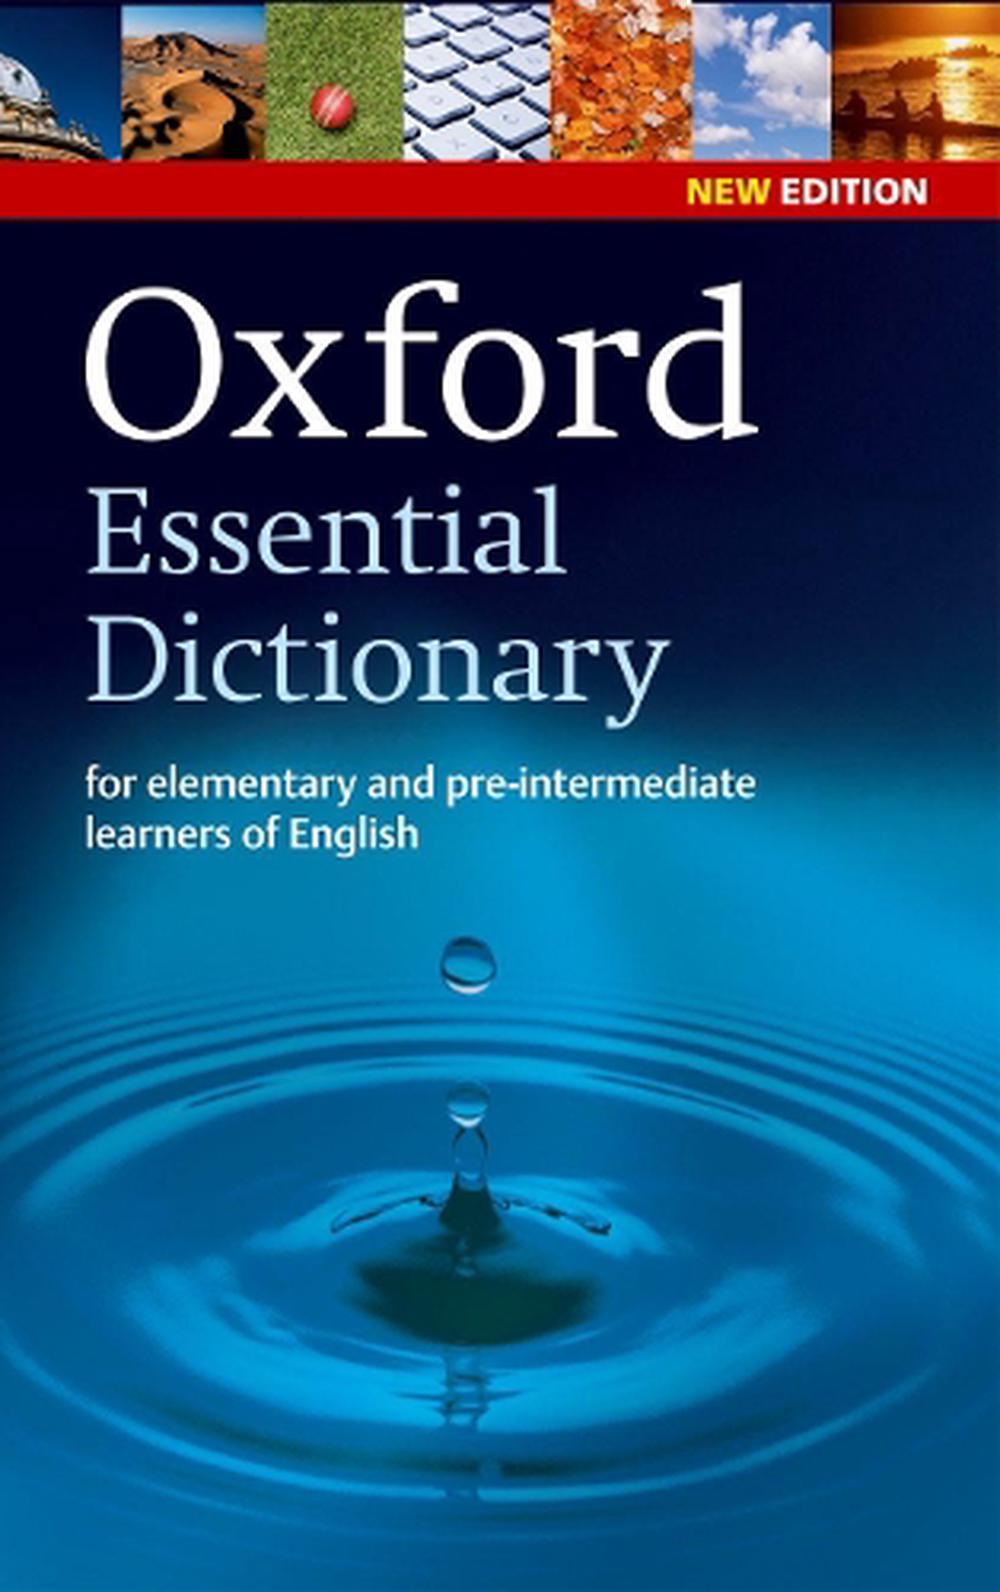 How to run oxford dictionary without cd - wesour